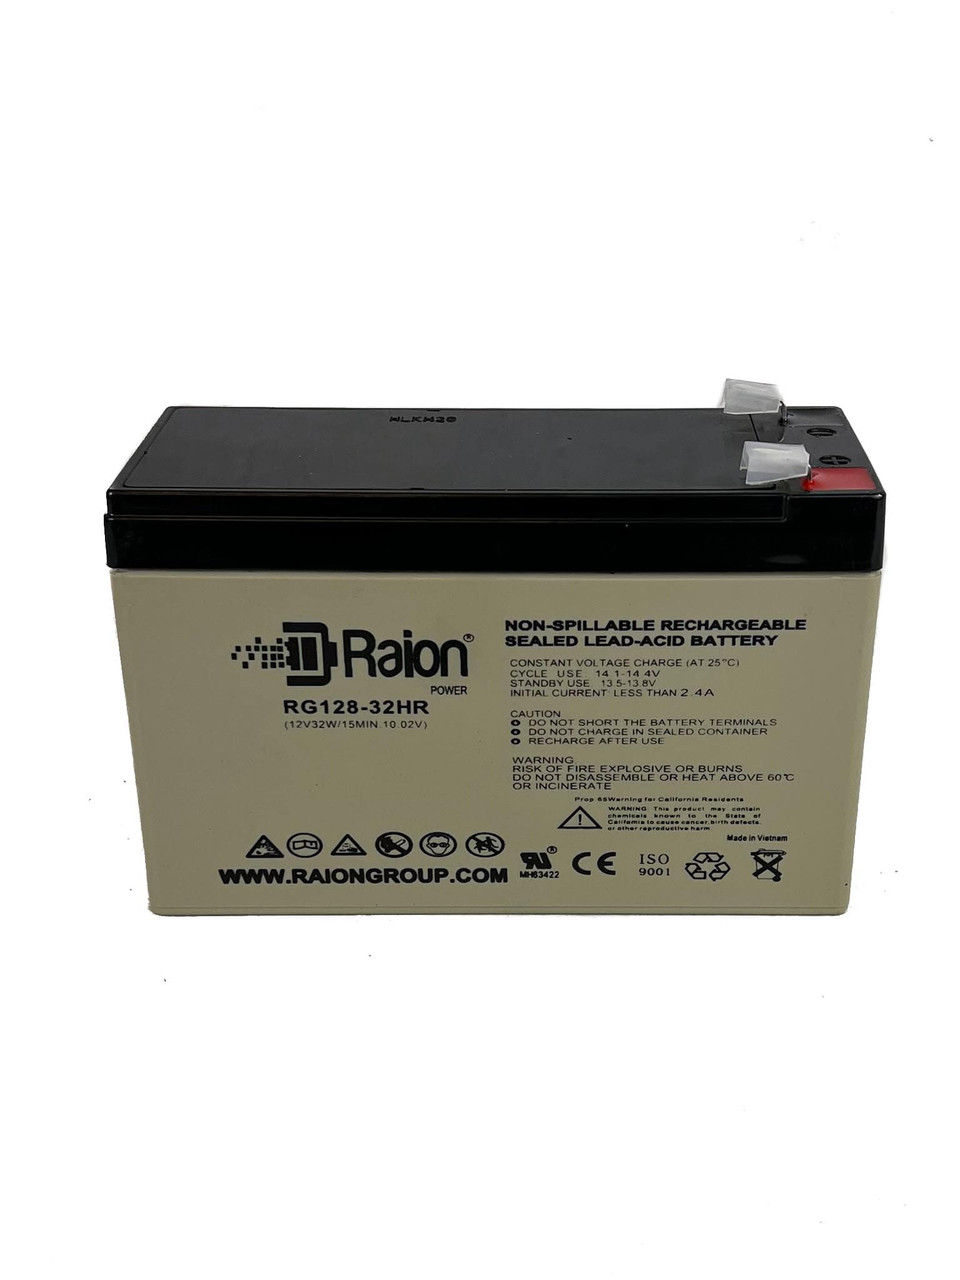 Raion Power RG128-32HR Replacement High Rate Battery Cartridge for ONEAC ON300M601